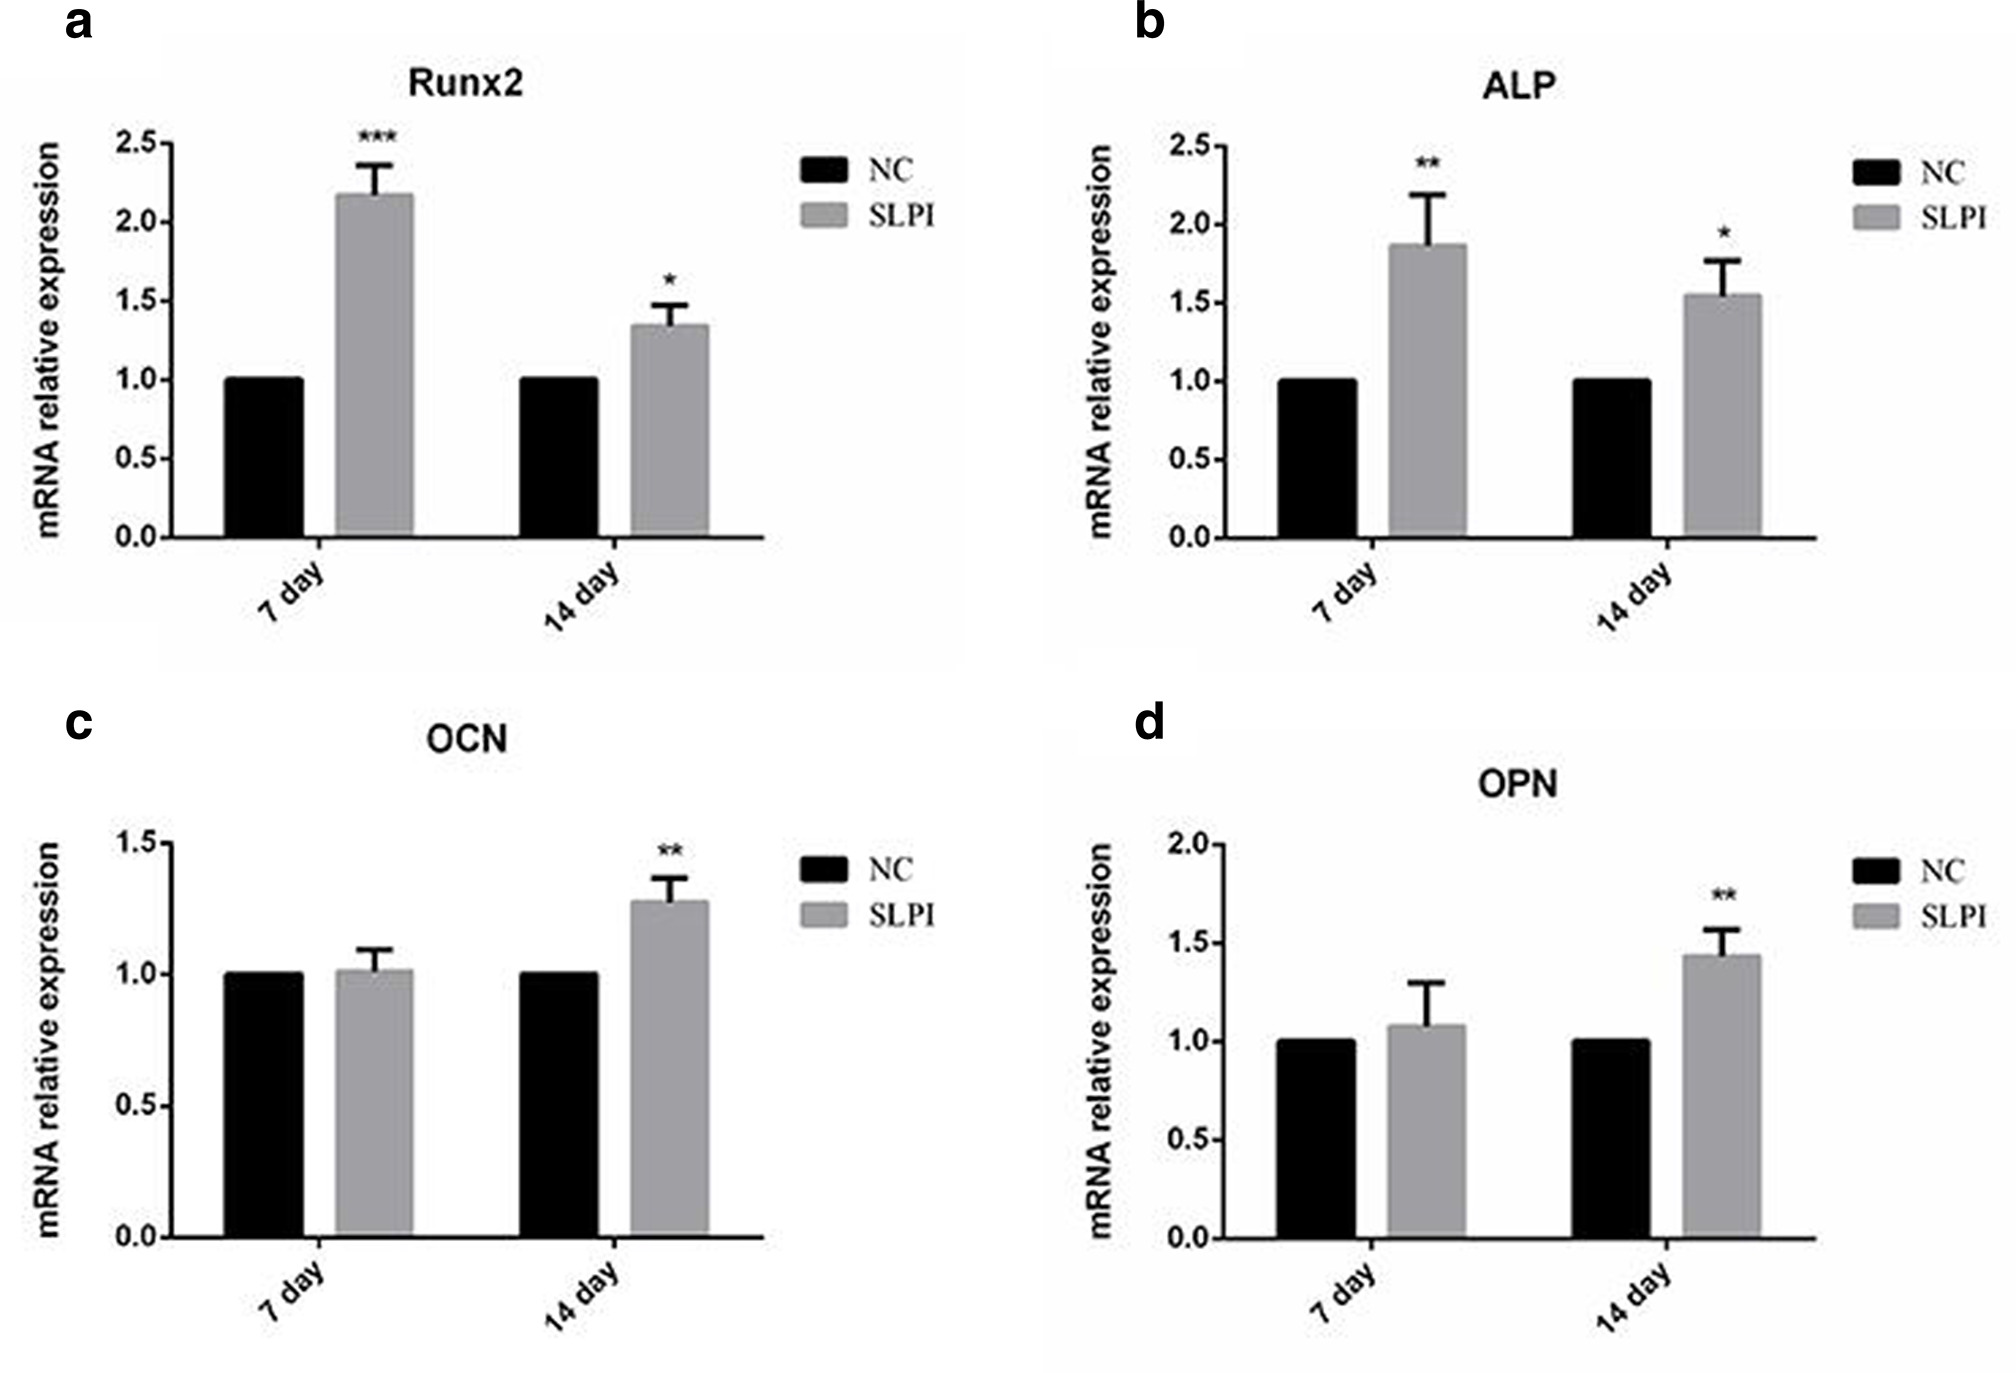 Fig. 4 
            After seven and 14 days of osteogenic induction, the levels of a) runt-related transcription factor 2 (Runx2), b) alkaline phosphatase (ALP), c) osteocalcin (OCN), and d) osteopontin (OPN) were measured by quantitative polymerase chain reaction (qPCR) (n = 3). Secretory leucocyte protease inhibitor (SLPI) increased the expression of Runx2, ALP, OCN, and OPN at different stages of osteogenic differentiation of bone mesenchymal stem cells (BMSCs). Runx2 and ALP increased significantly in the early stage of induction while OCN and OPN were upregulated in the more advanced stage of osteogenic induction. *p < 0.05; **p < 0.01; and ***p < 0.001. mRNA, messenger RNA; NC, negative control.
          